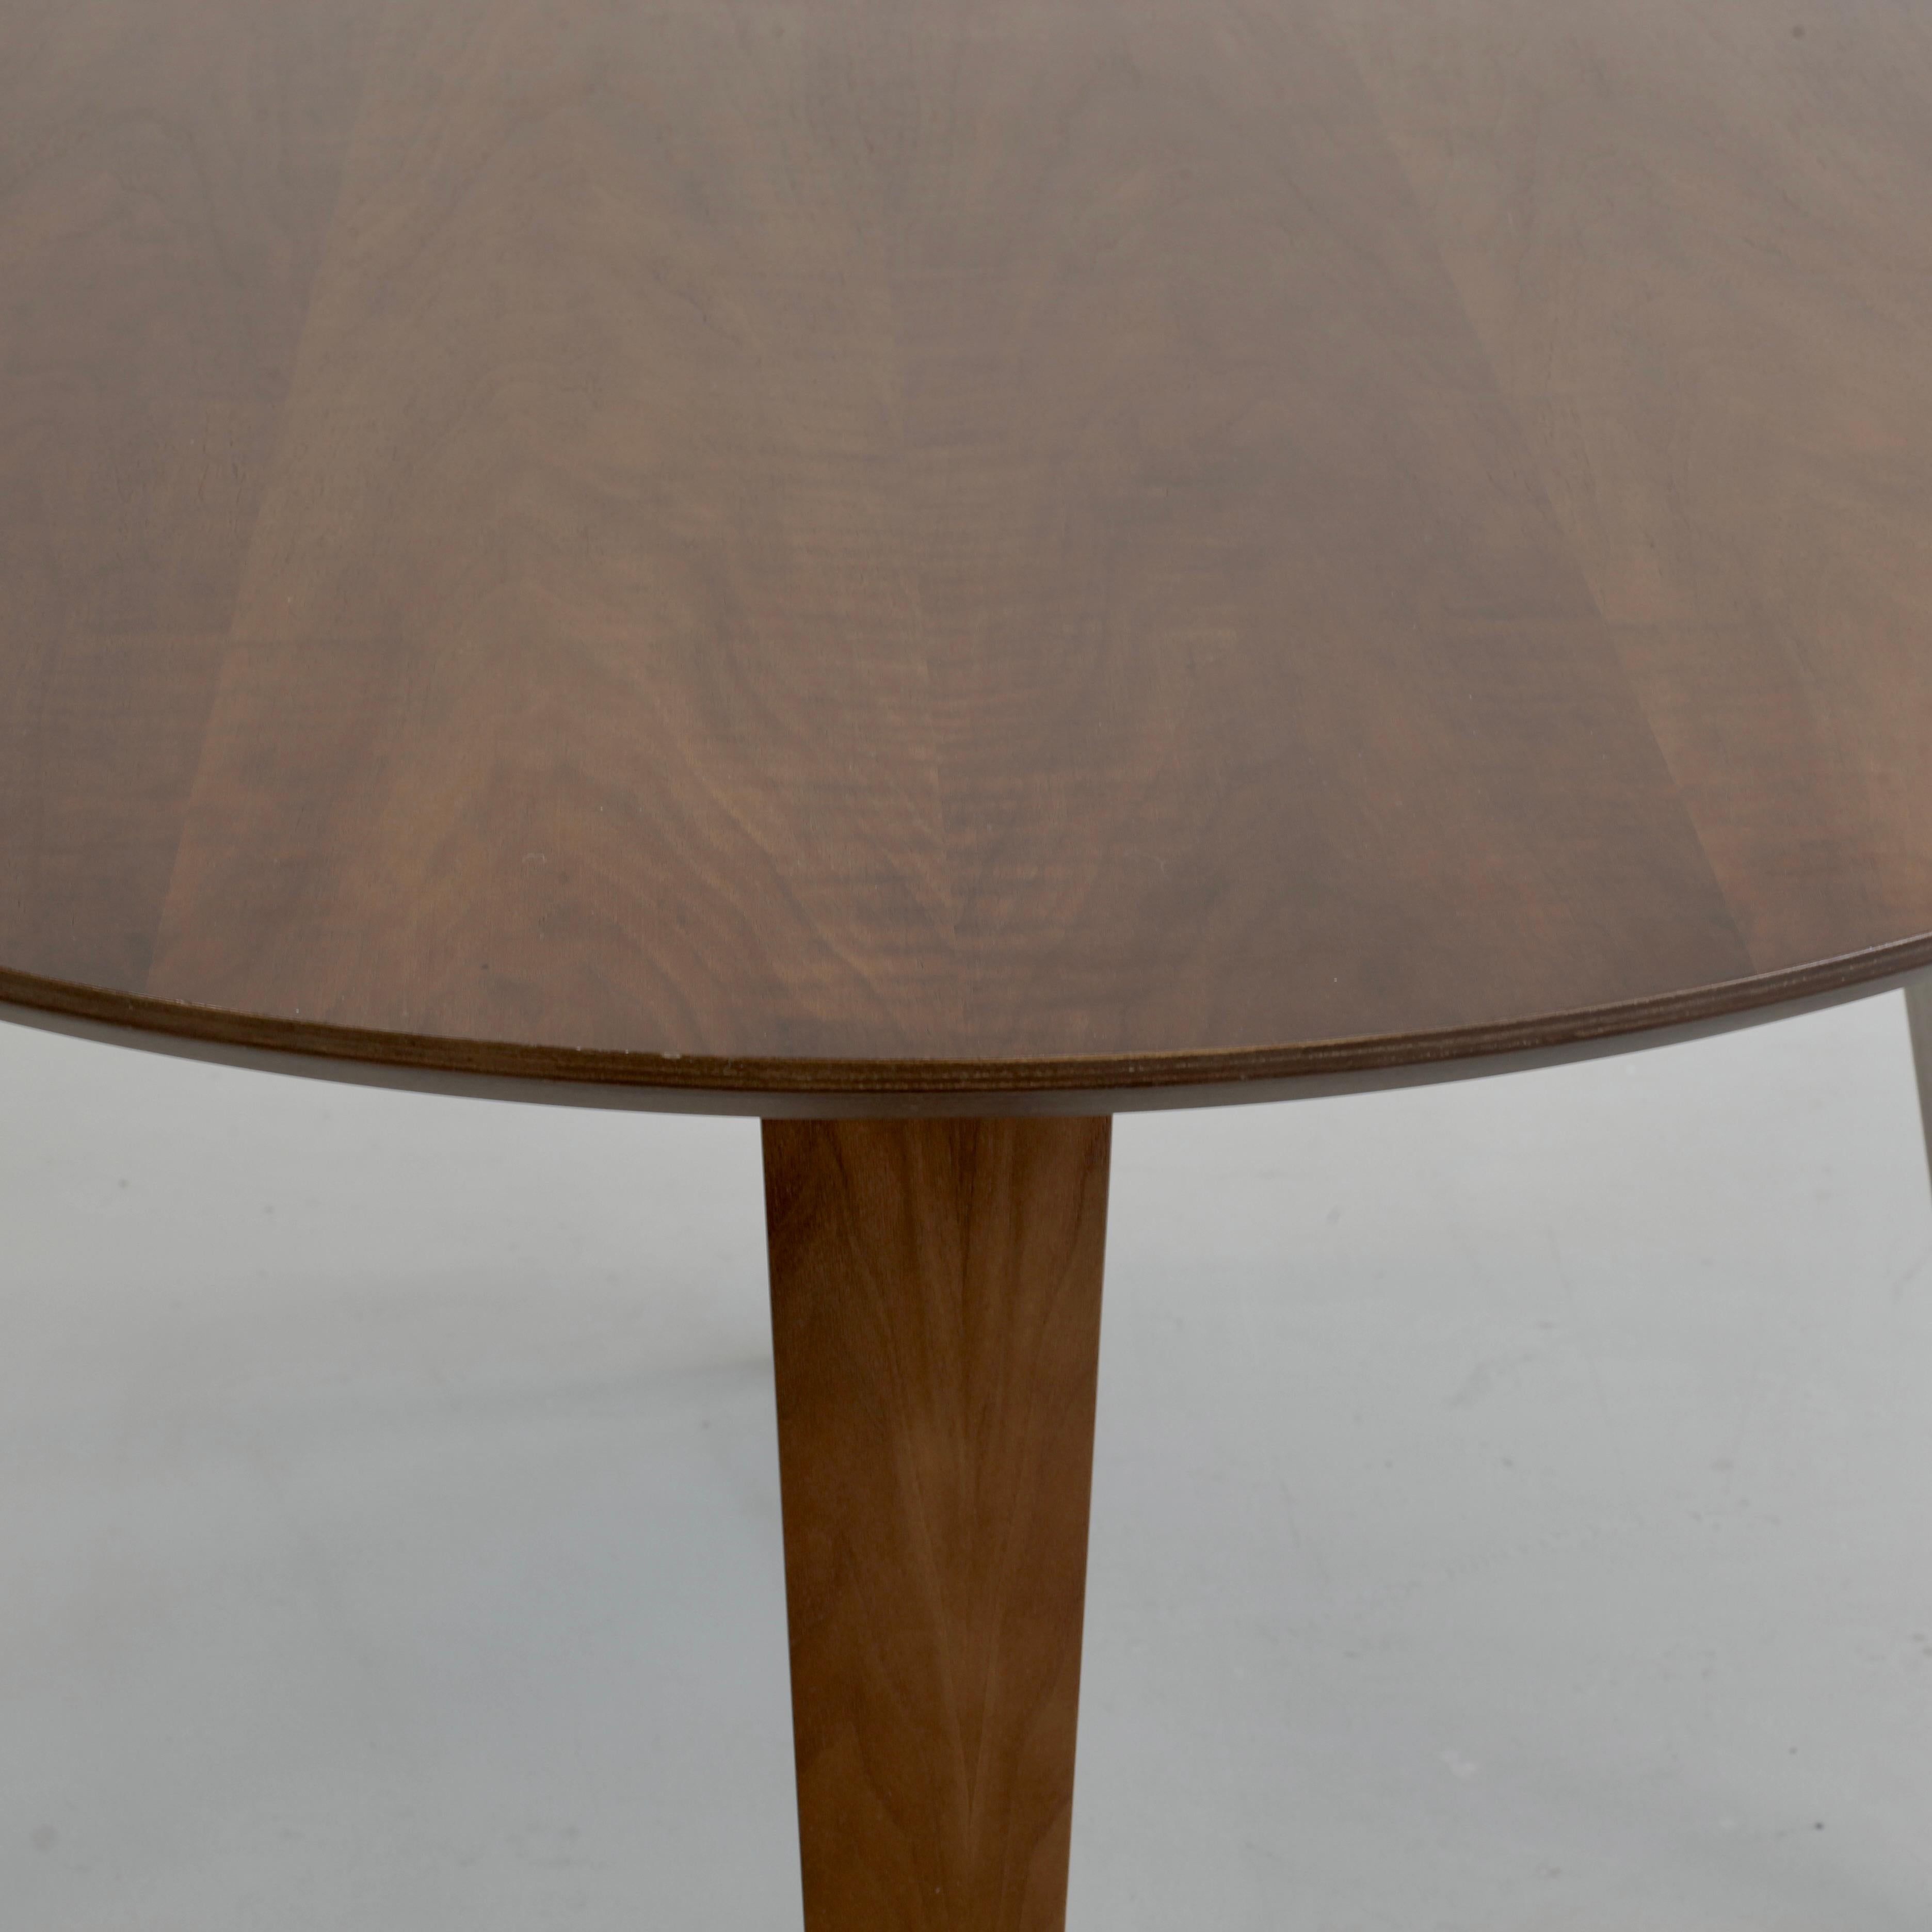 Round dining table designed by Benjamin Cherner. U.S.A., Cherner, 2003.

The top is made of cross-ply plywood featuring classic walnut veneer with a tapered profiled exposed edge. The legs are moulded laminated wood with exposed ply and hardwood